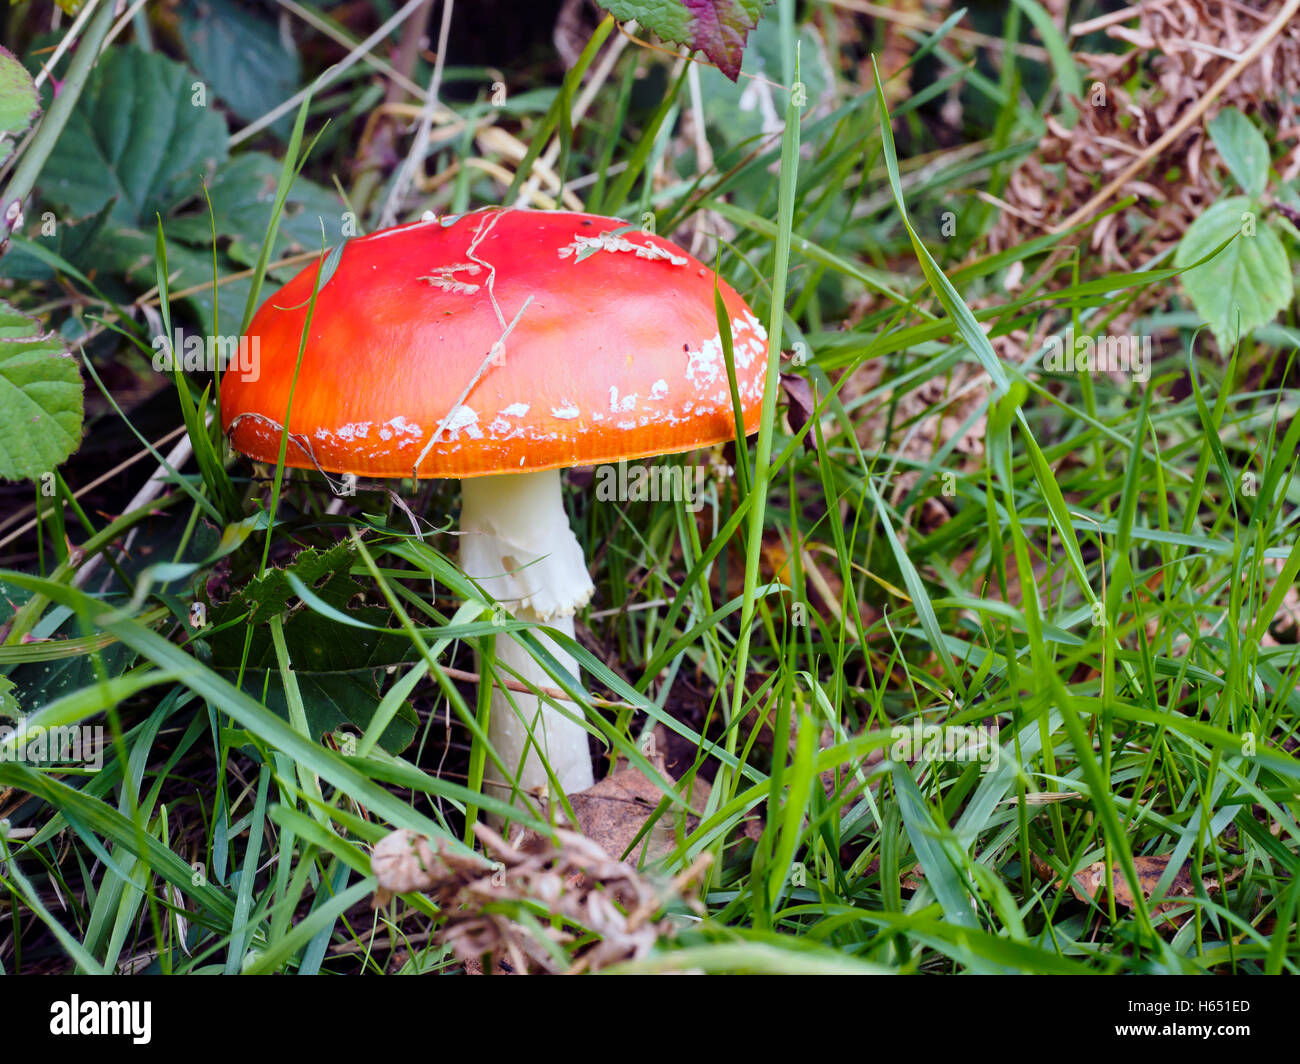 Amanita muscaria, commonly known as the fly agaric or fly amanita mushroom growing on Weybourne Heath, Norfolk. Stock Photo